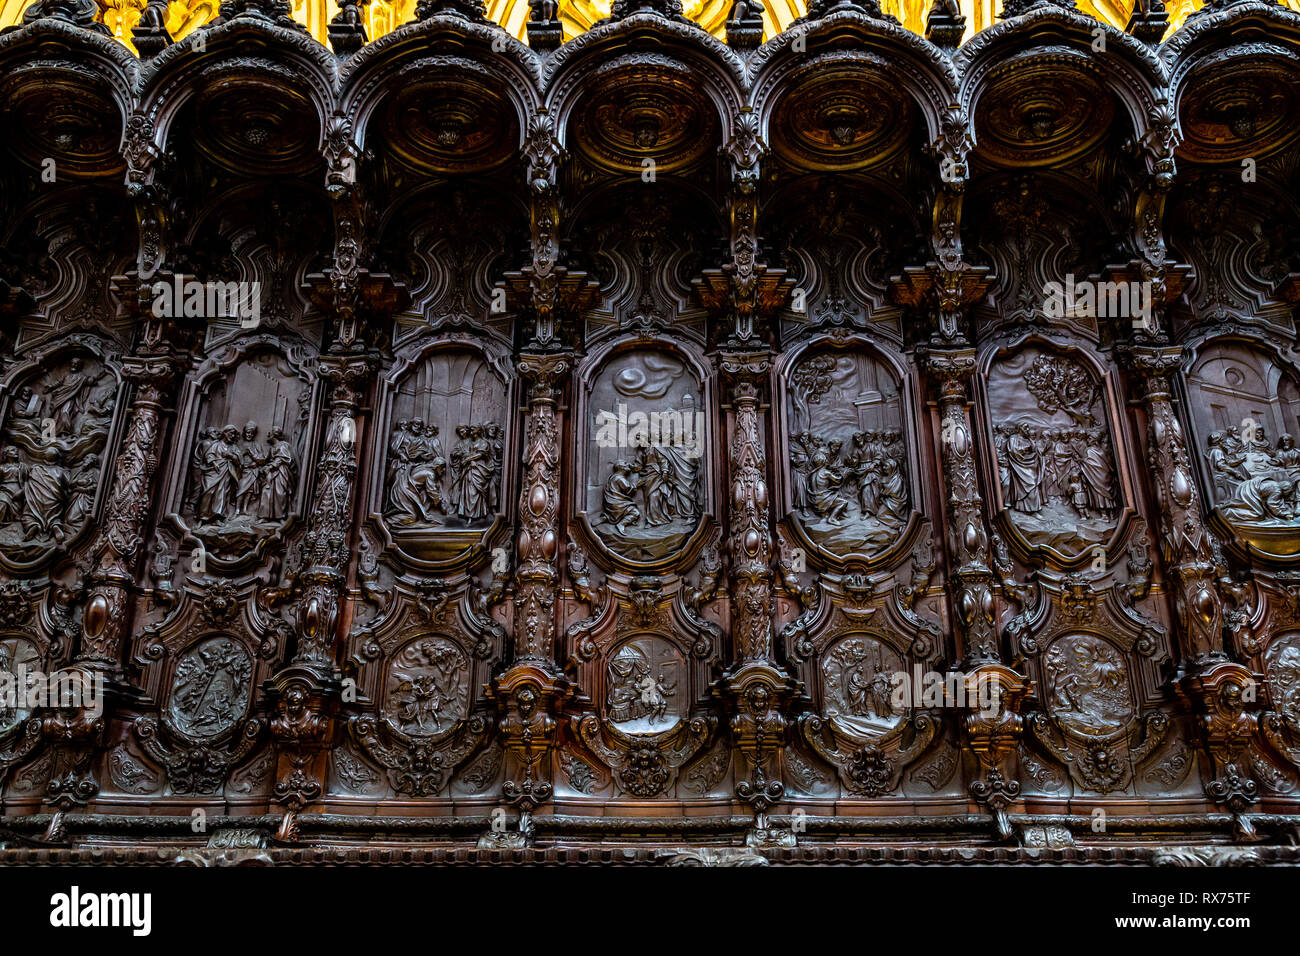 Oct 2018 - Cordoba, Spain - The wooden carved seats of the choir of Mezquita, Catedral de Cordoba, a former Moorish Mosque that is now the Cathedral o Stock Photo